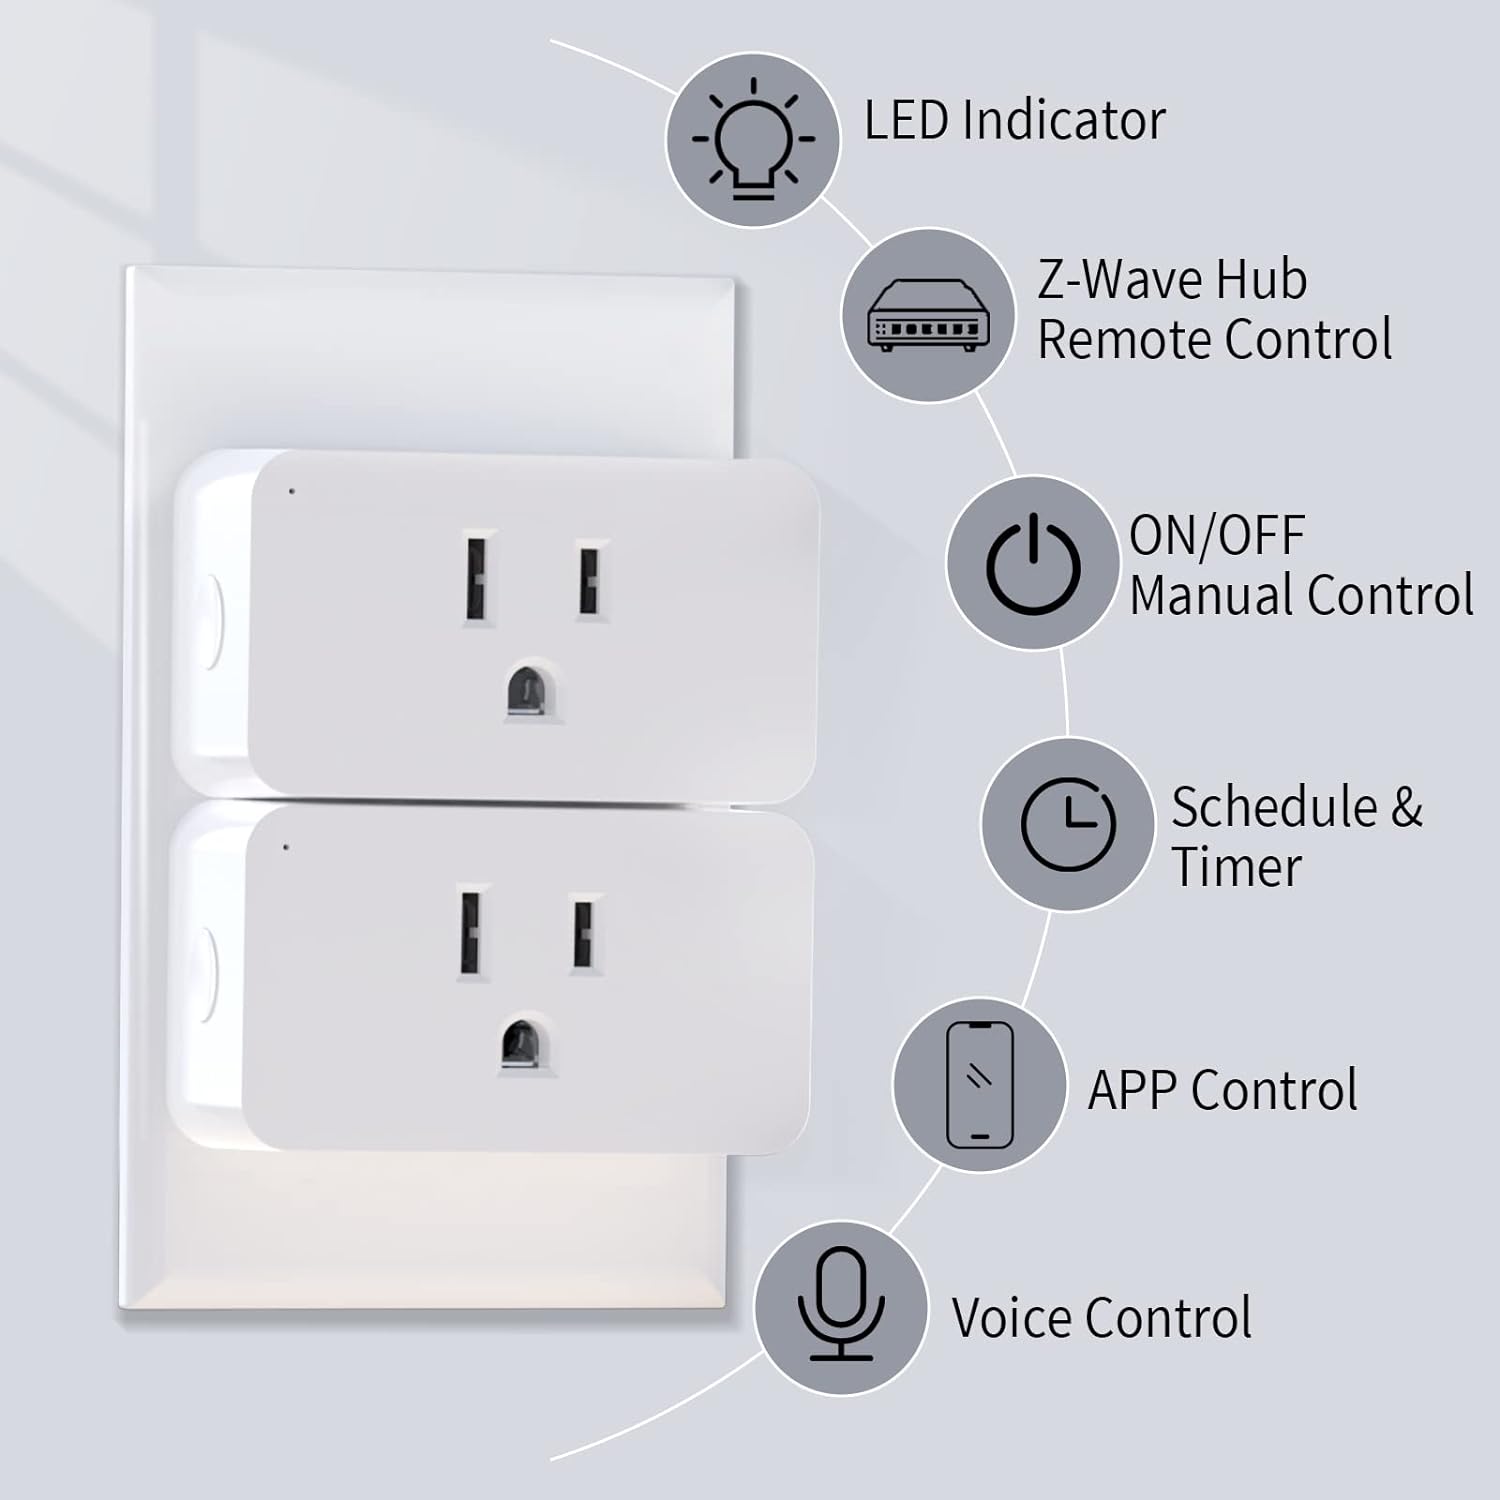 Minoston Z-Wave Outlet, Mini Smart Plug, 15A, Z-Wave Hub Required, Built-in  Repeater/Range Extender, Work with SmartThings, Wink, Alexa, Google